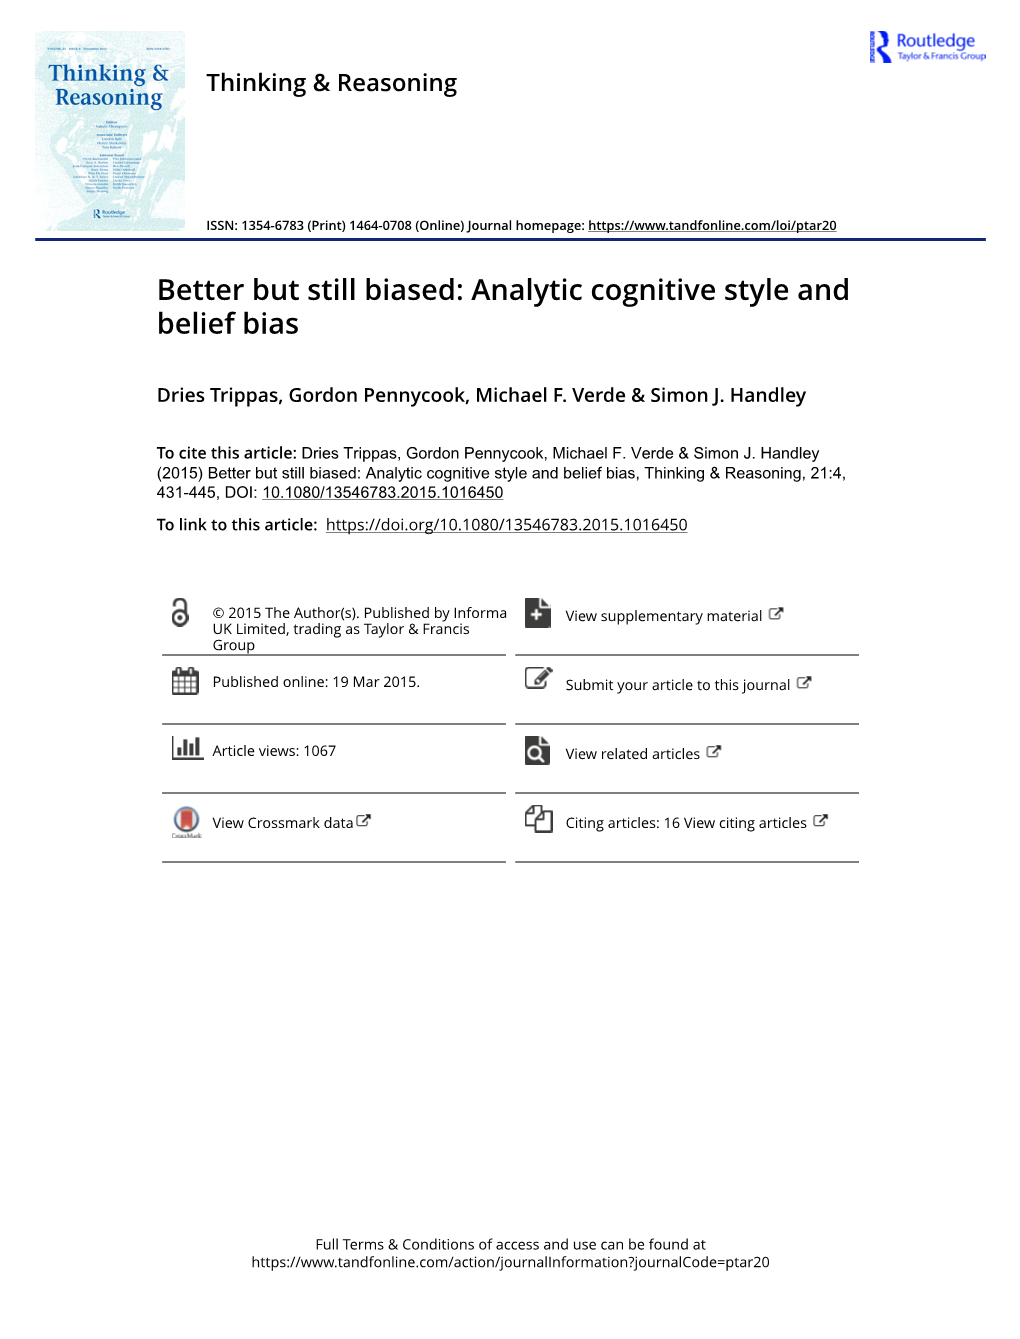 Analytic Cognitive Style and Belief Bias